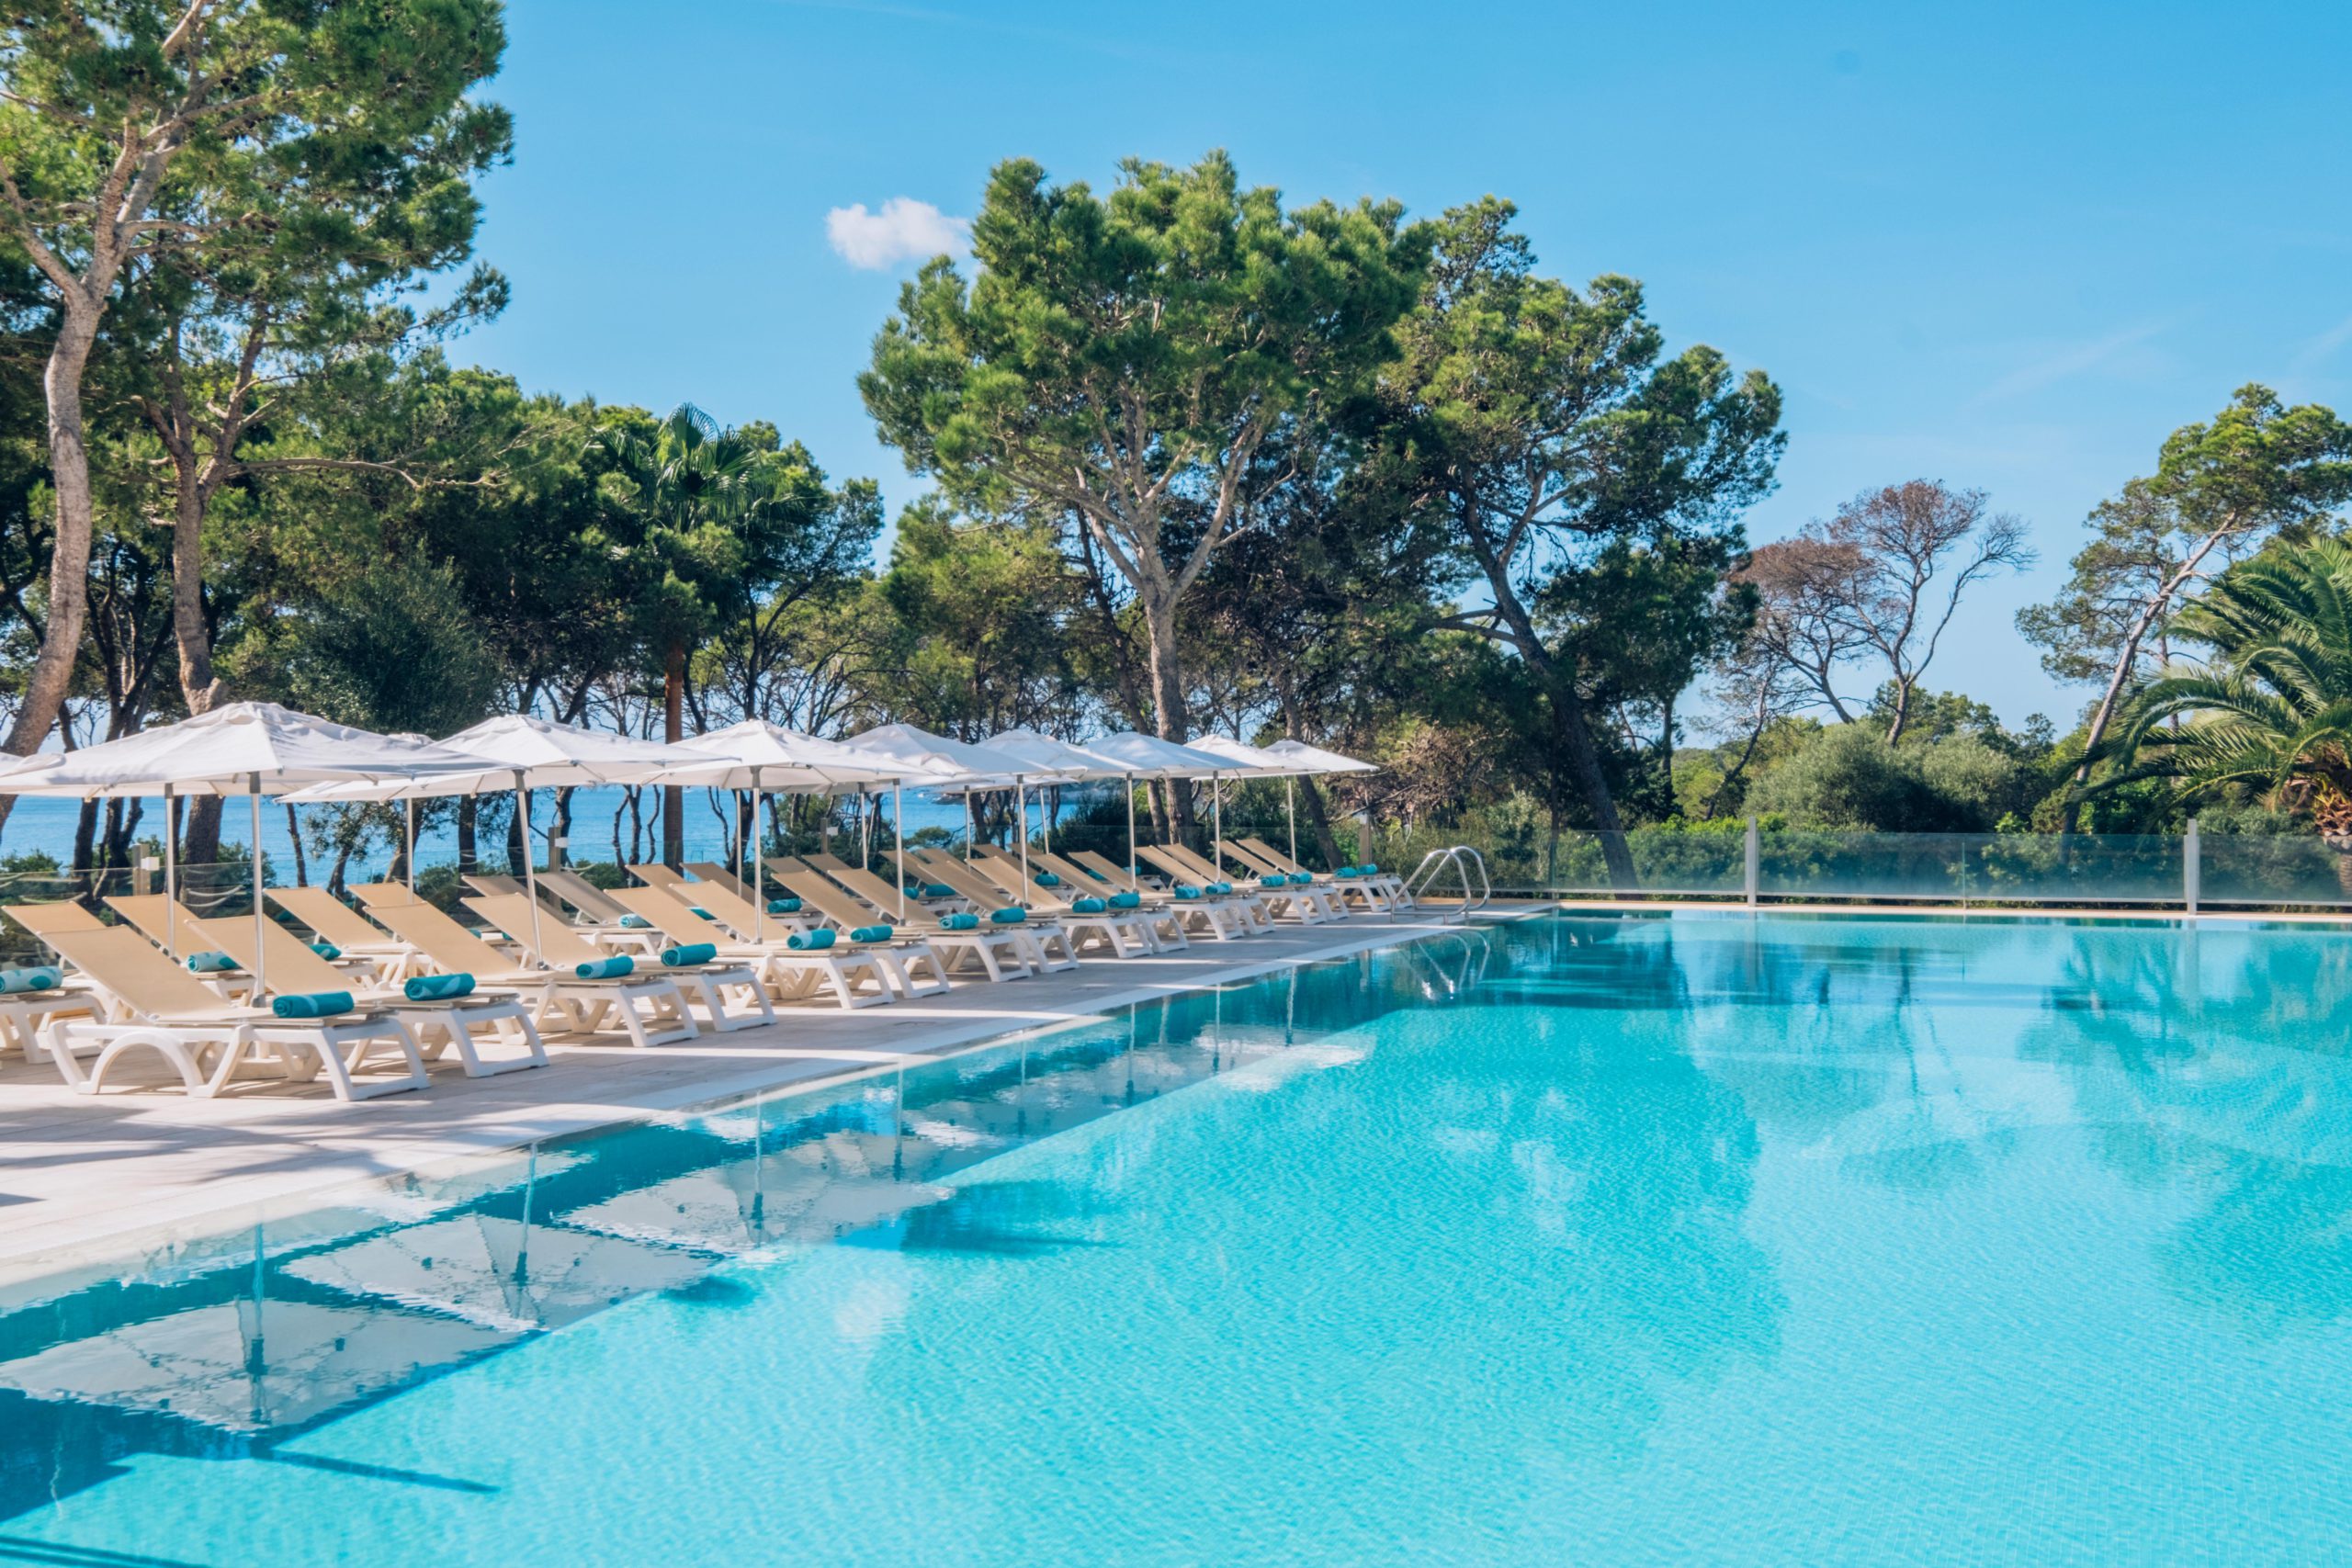 A serene pool and surrounding pool deck with loungers at Iberostar® Club Cala Barca, one of the best all-inclusive hotels in Mallorca for families.